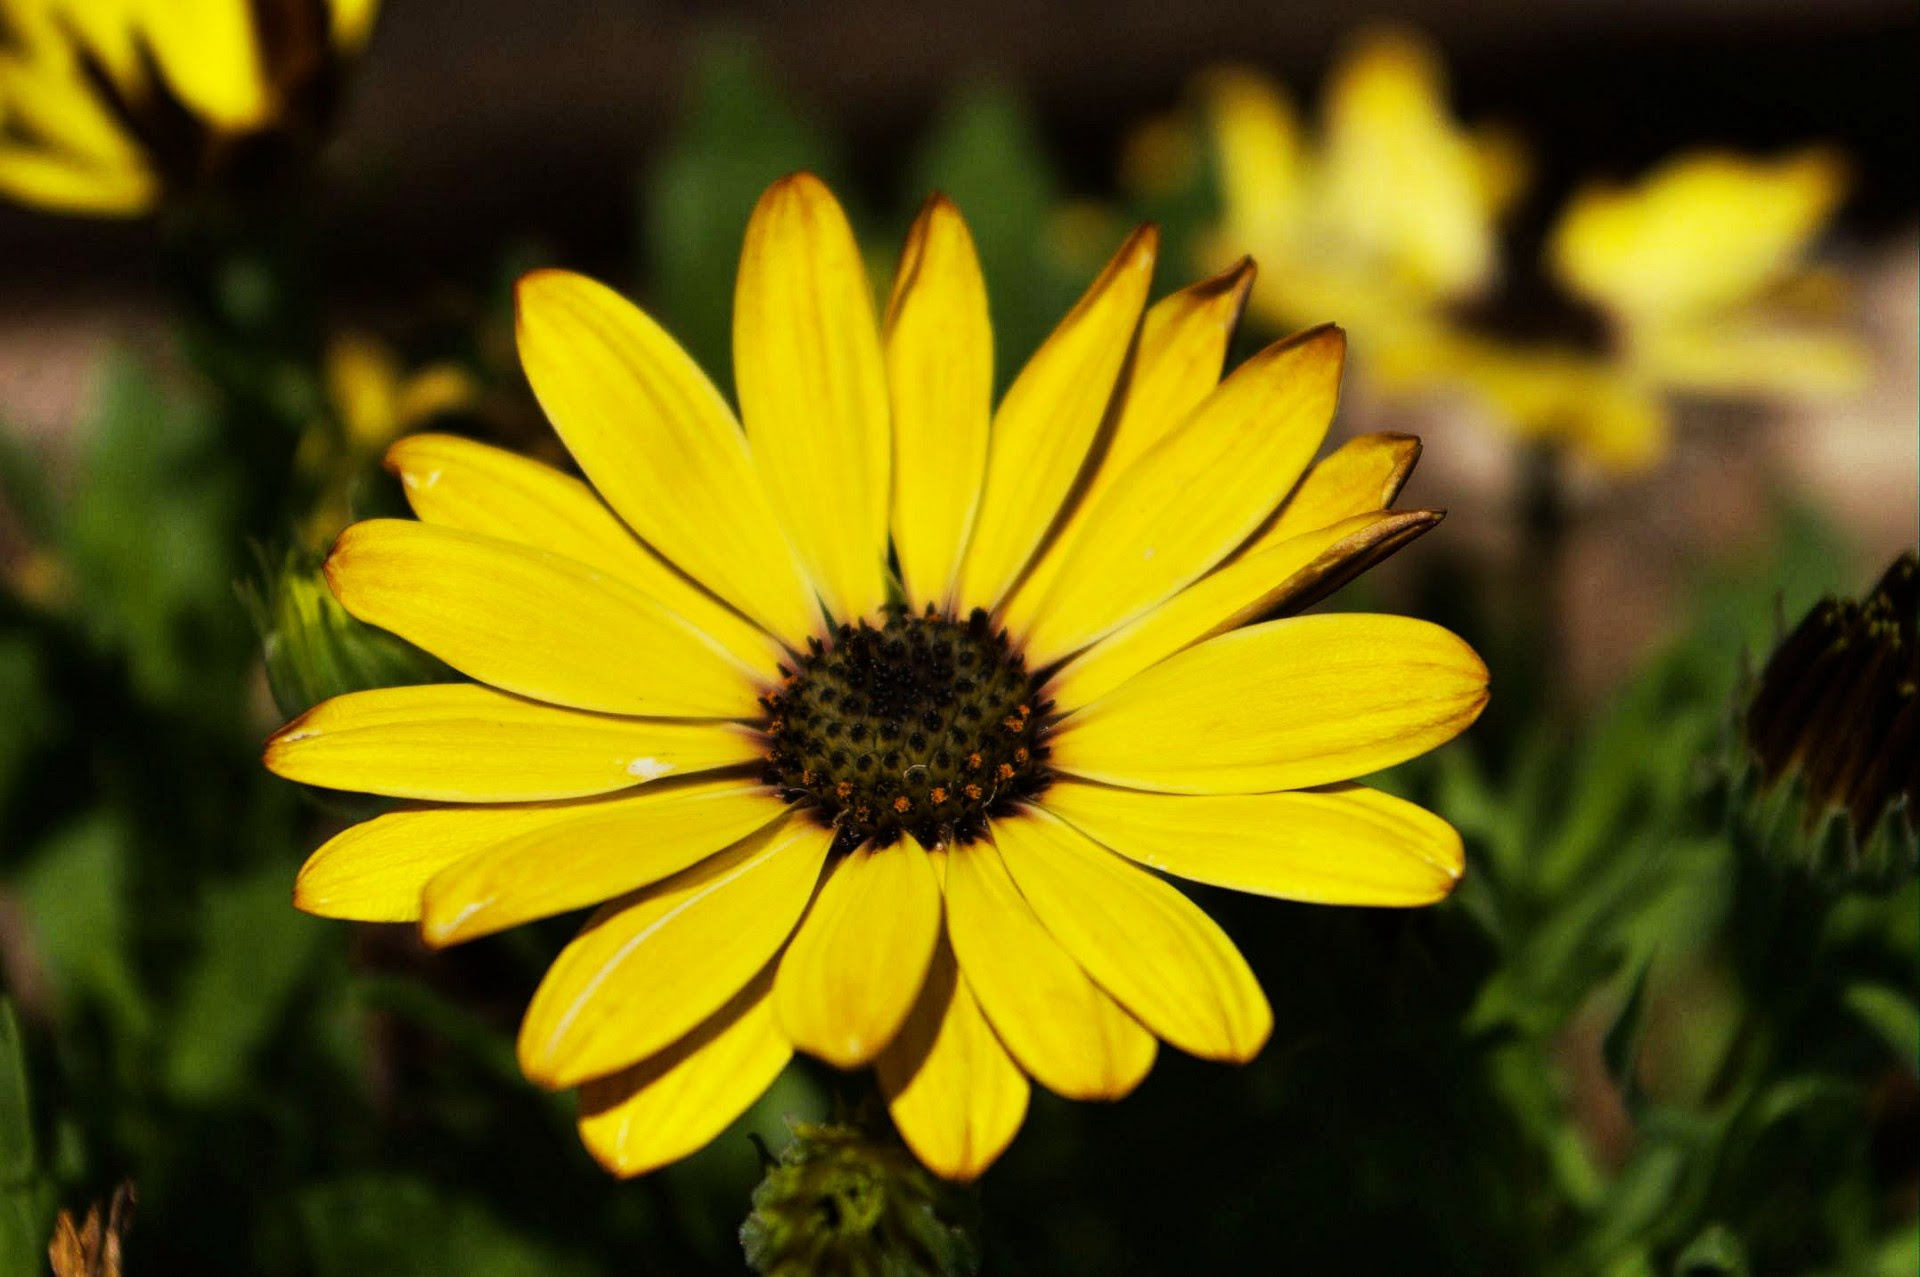 Yellow Daisy Flower Free Stock Public Domain. view image image= &pictur...